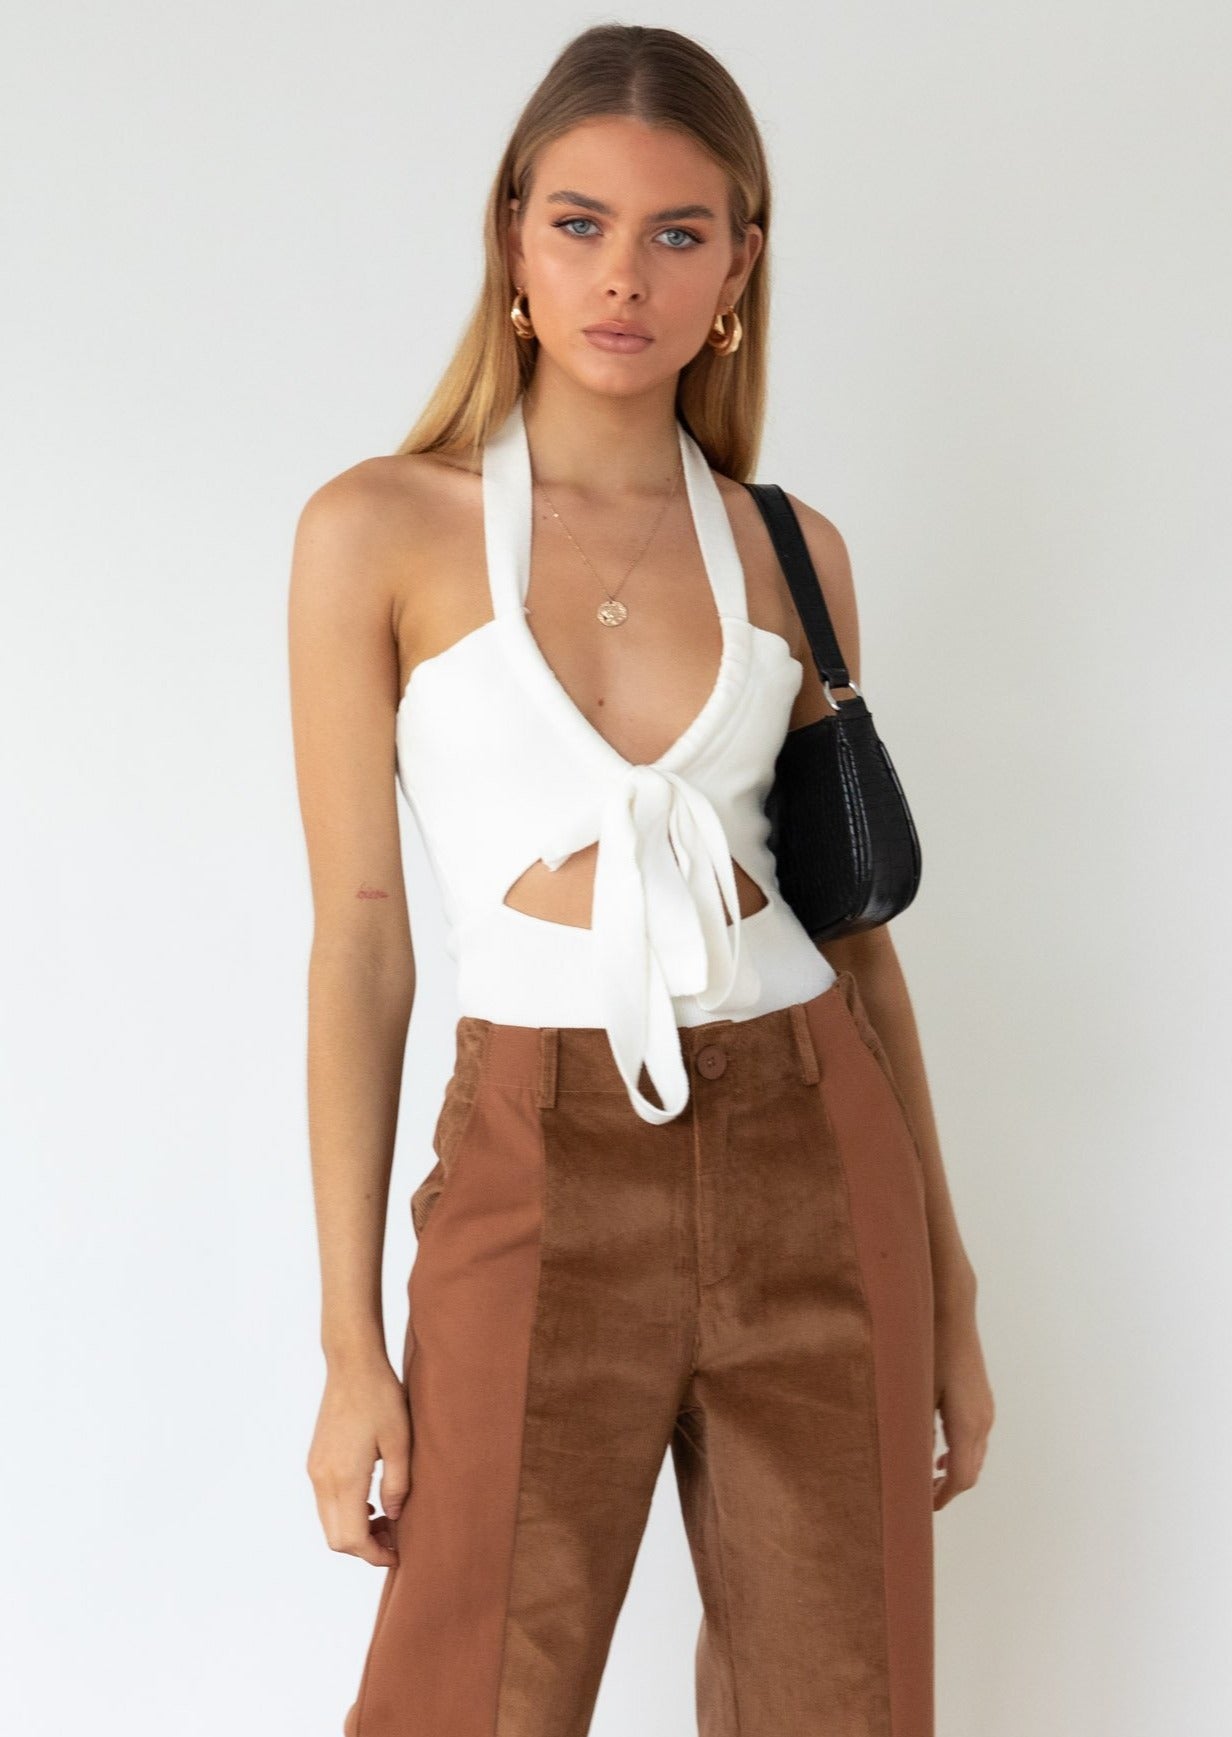 Loose Ends Bodysuit - Off White